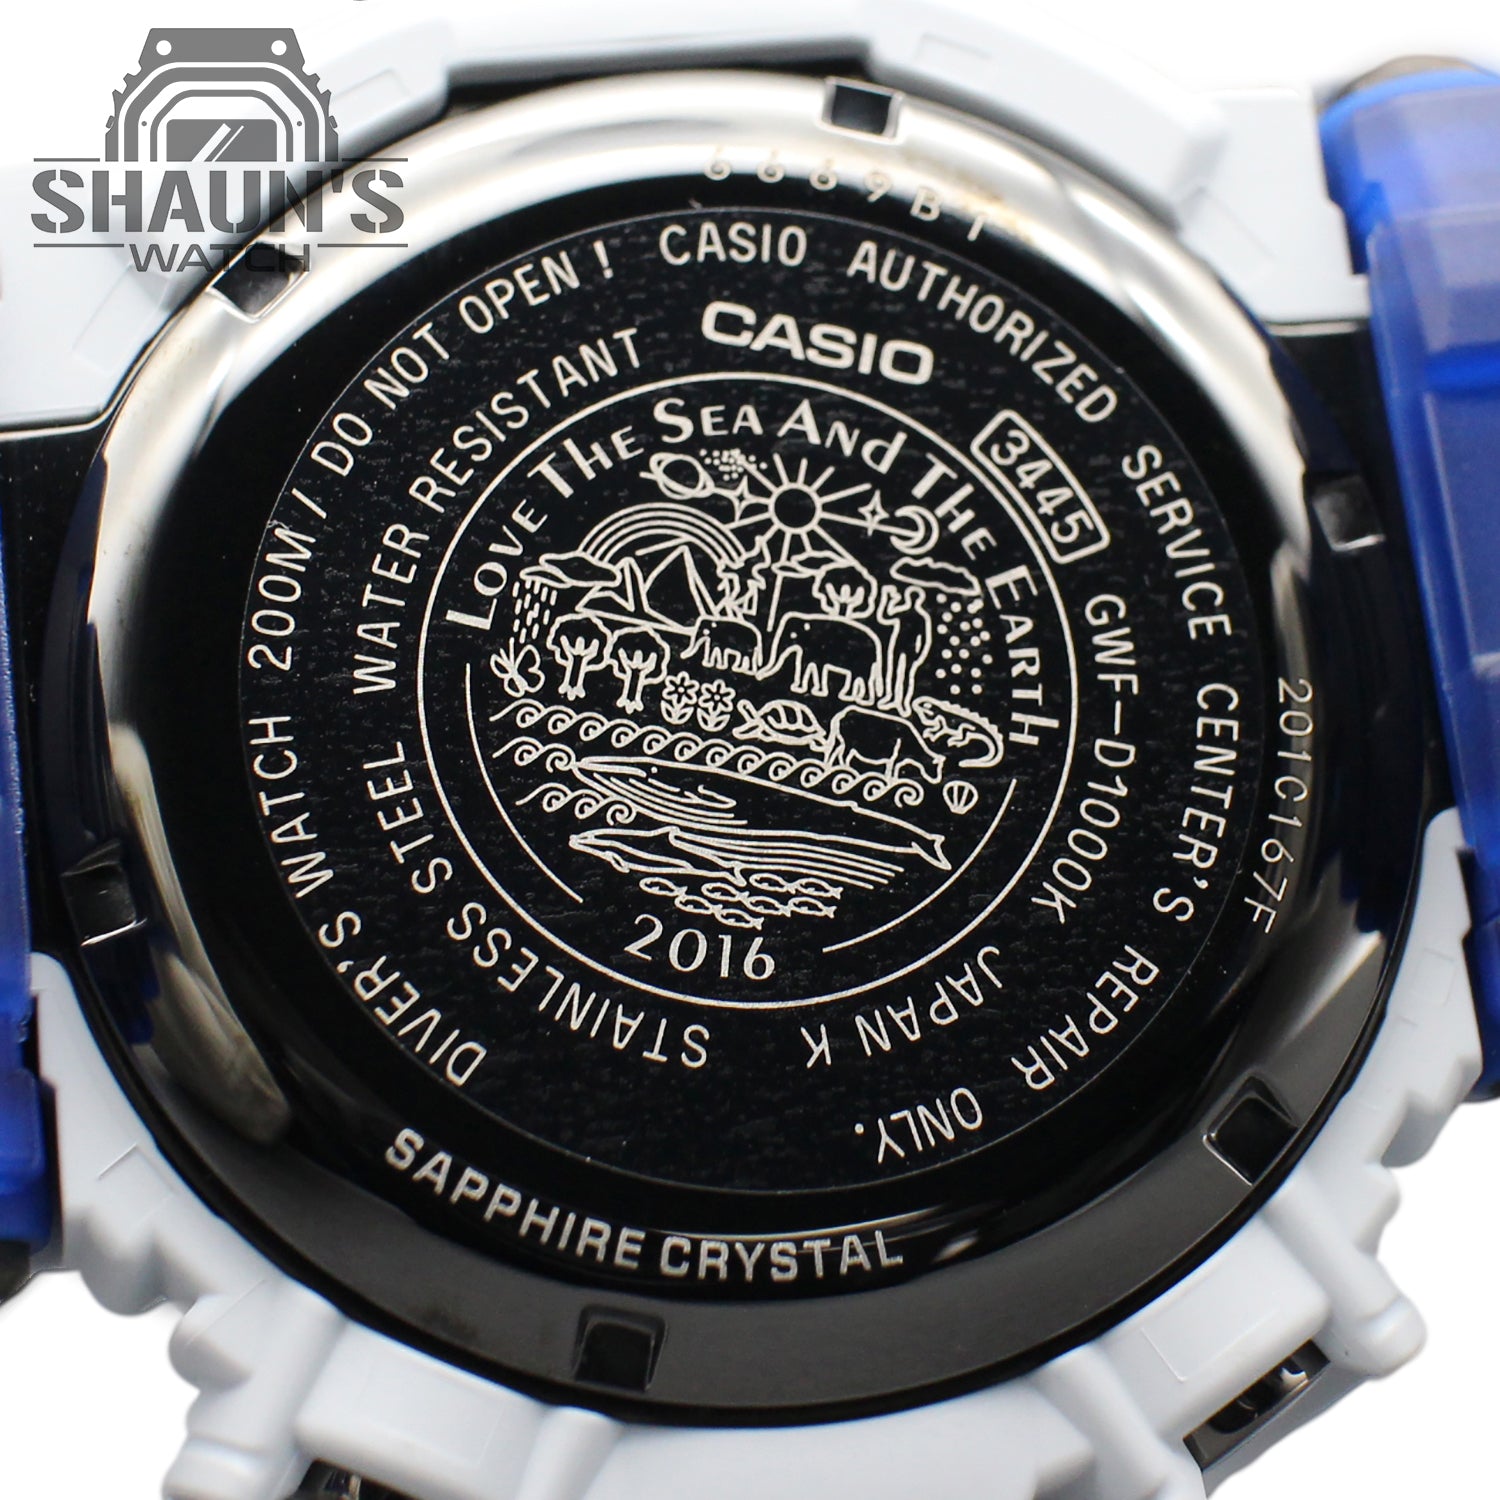 CASIO G-SHOCK GWF-D1000K-7JR FROGMAN Love The Sea and The Earth